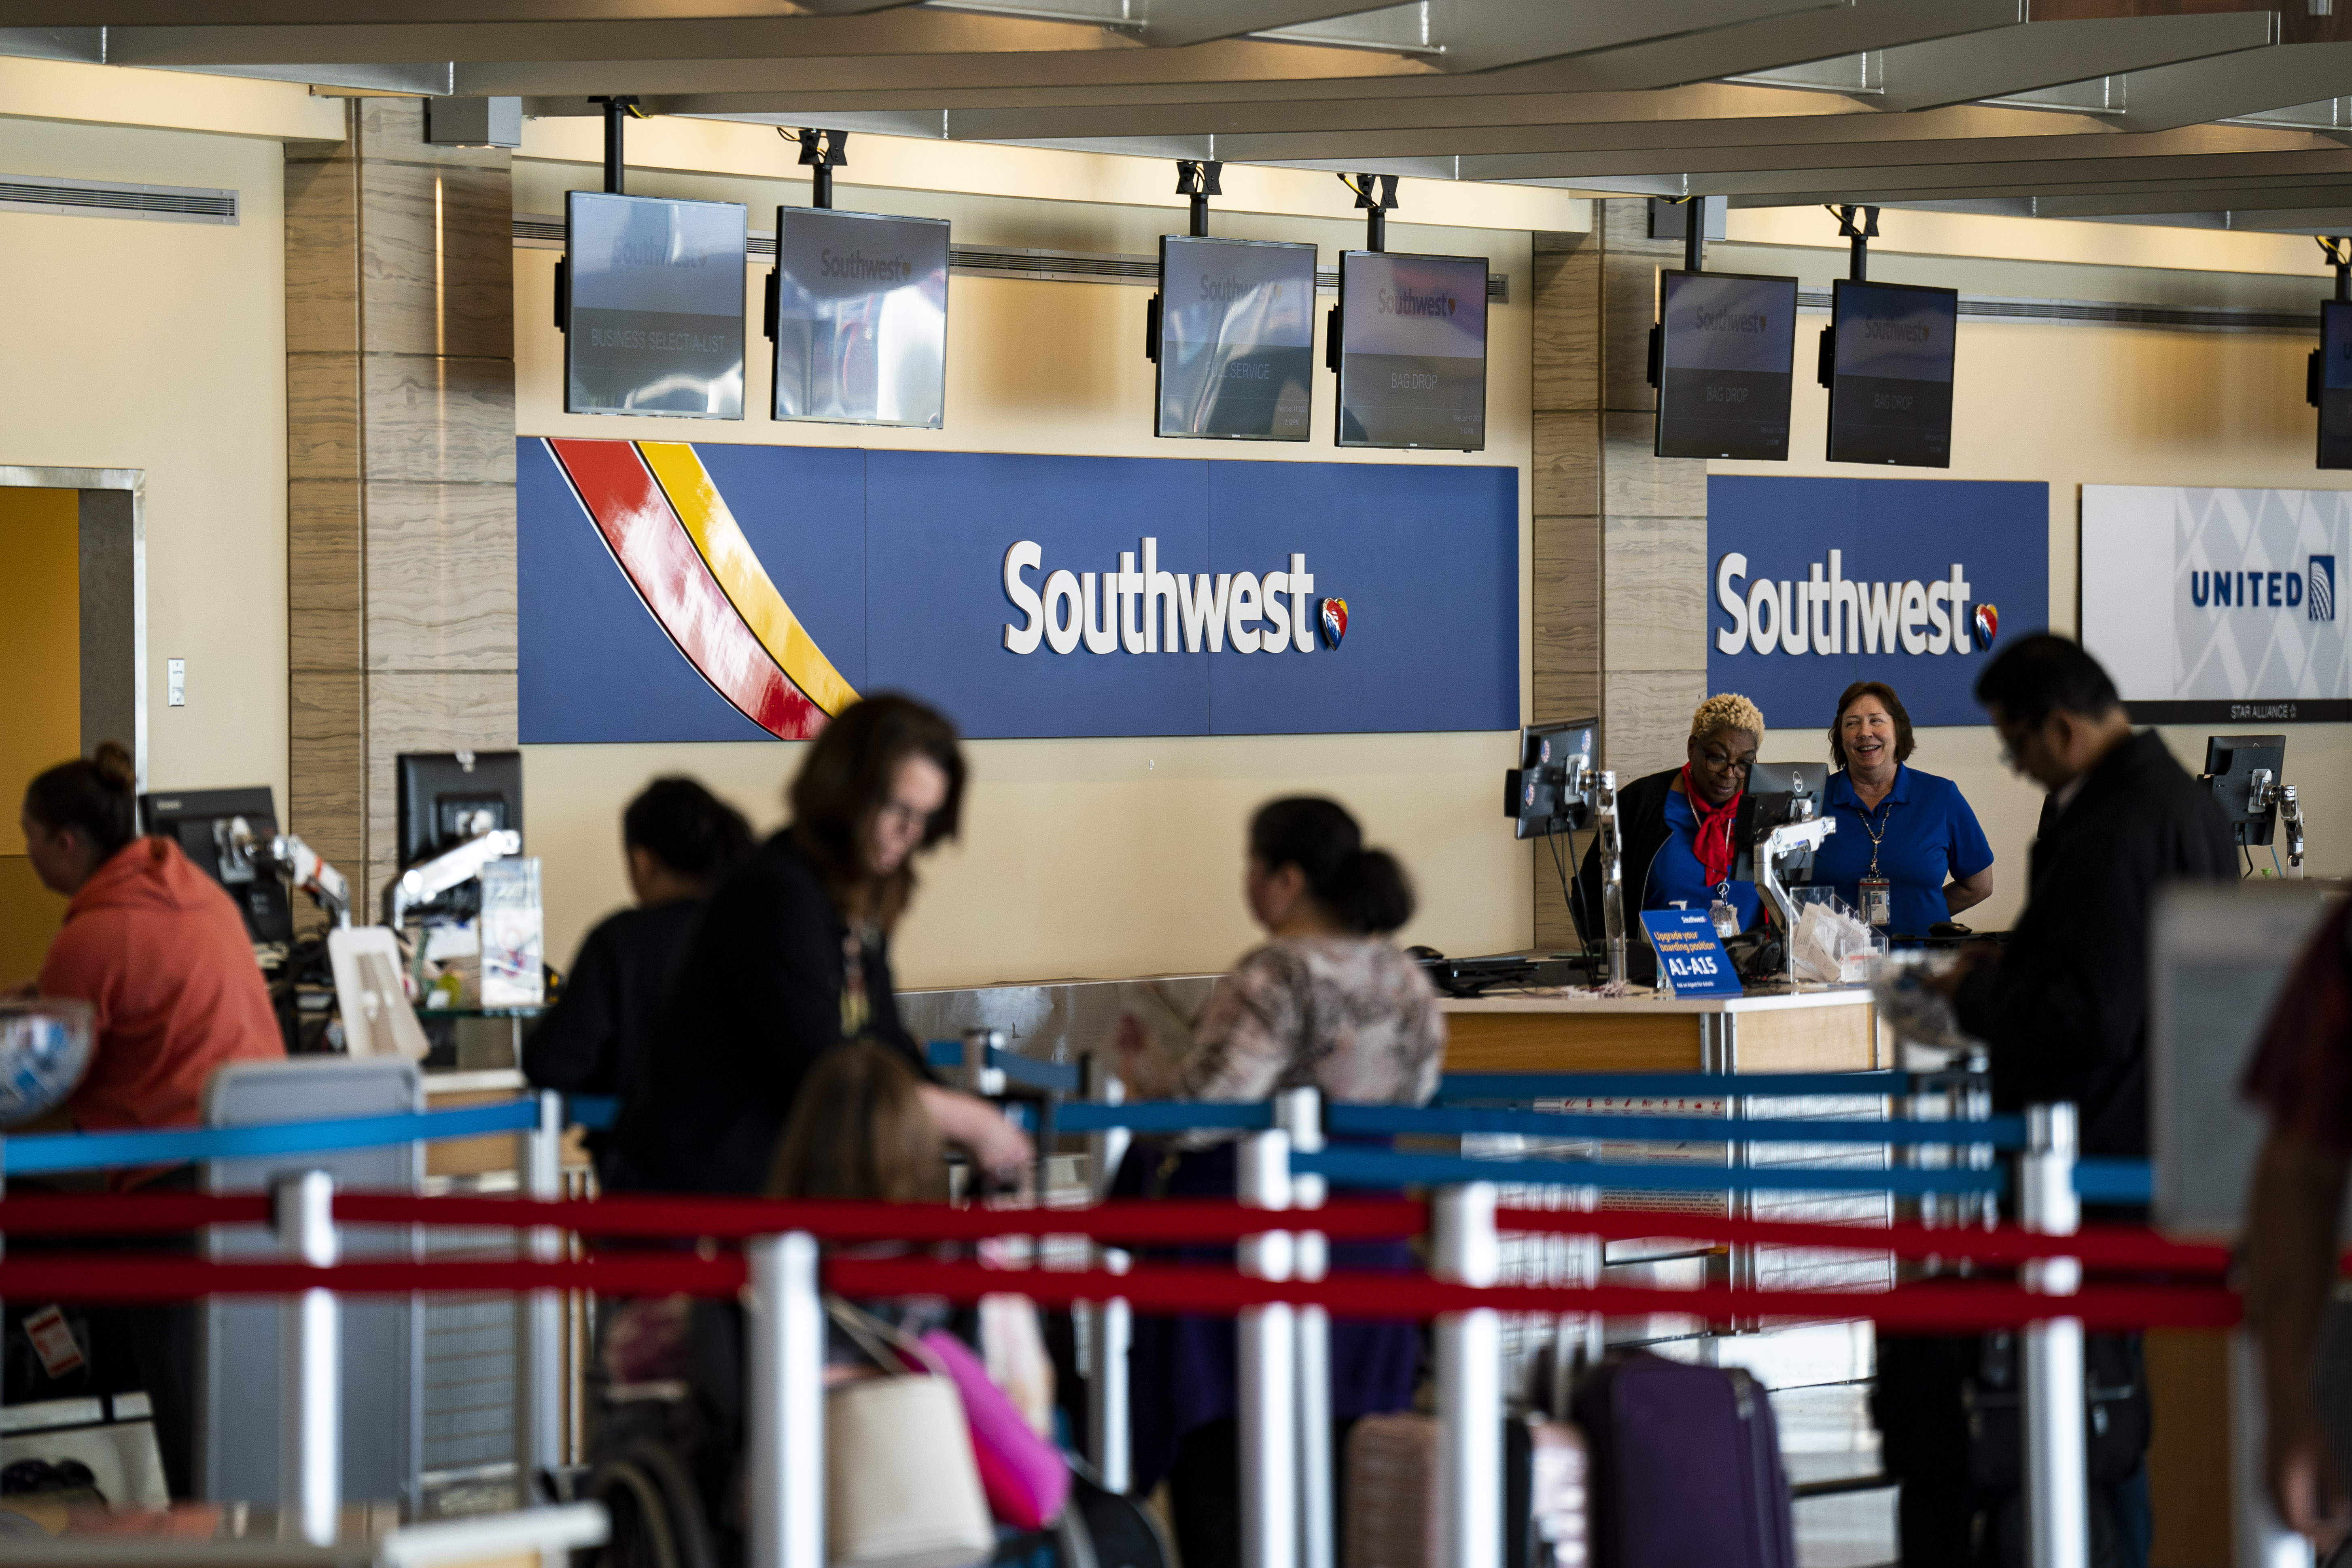 Southwest customers at the airport